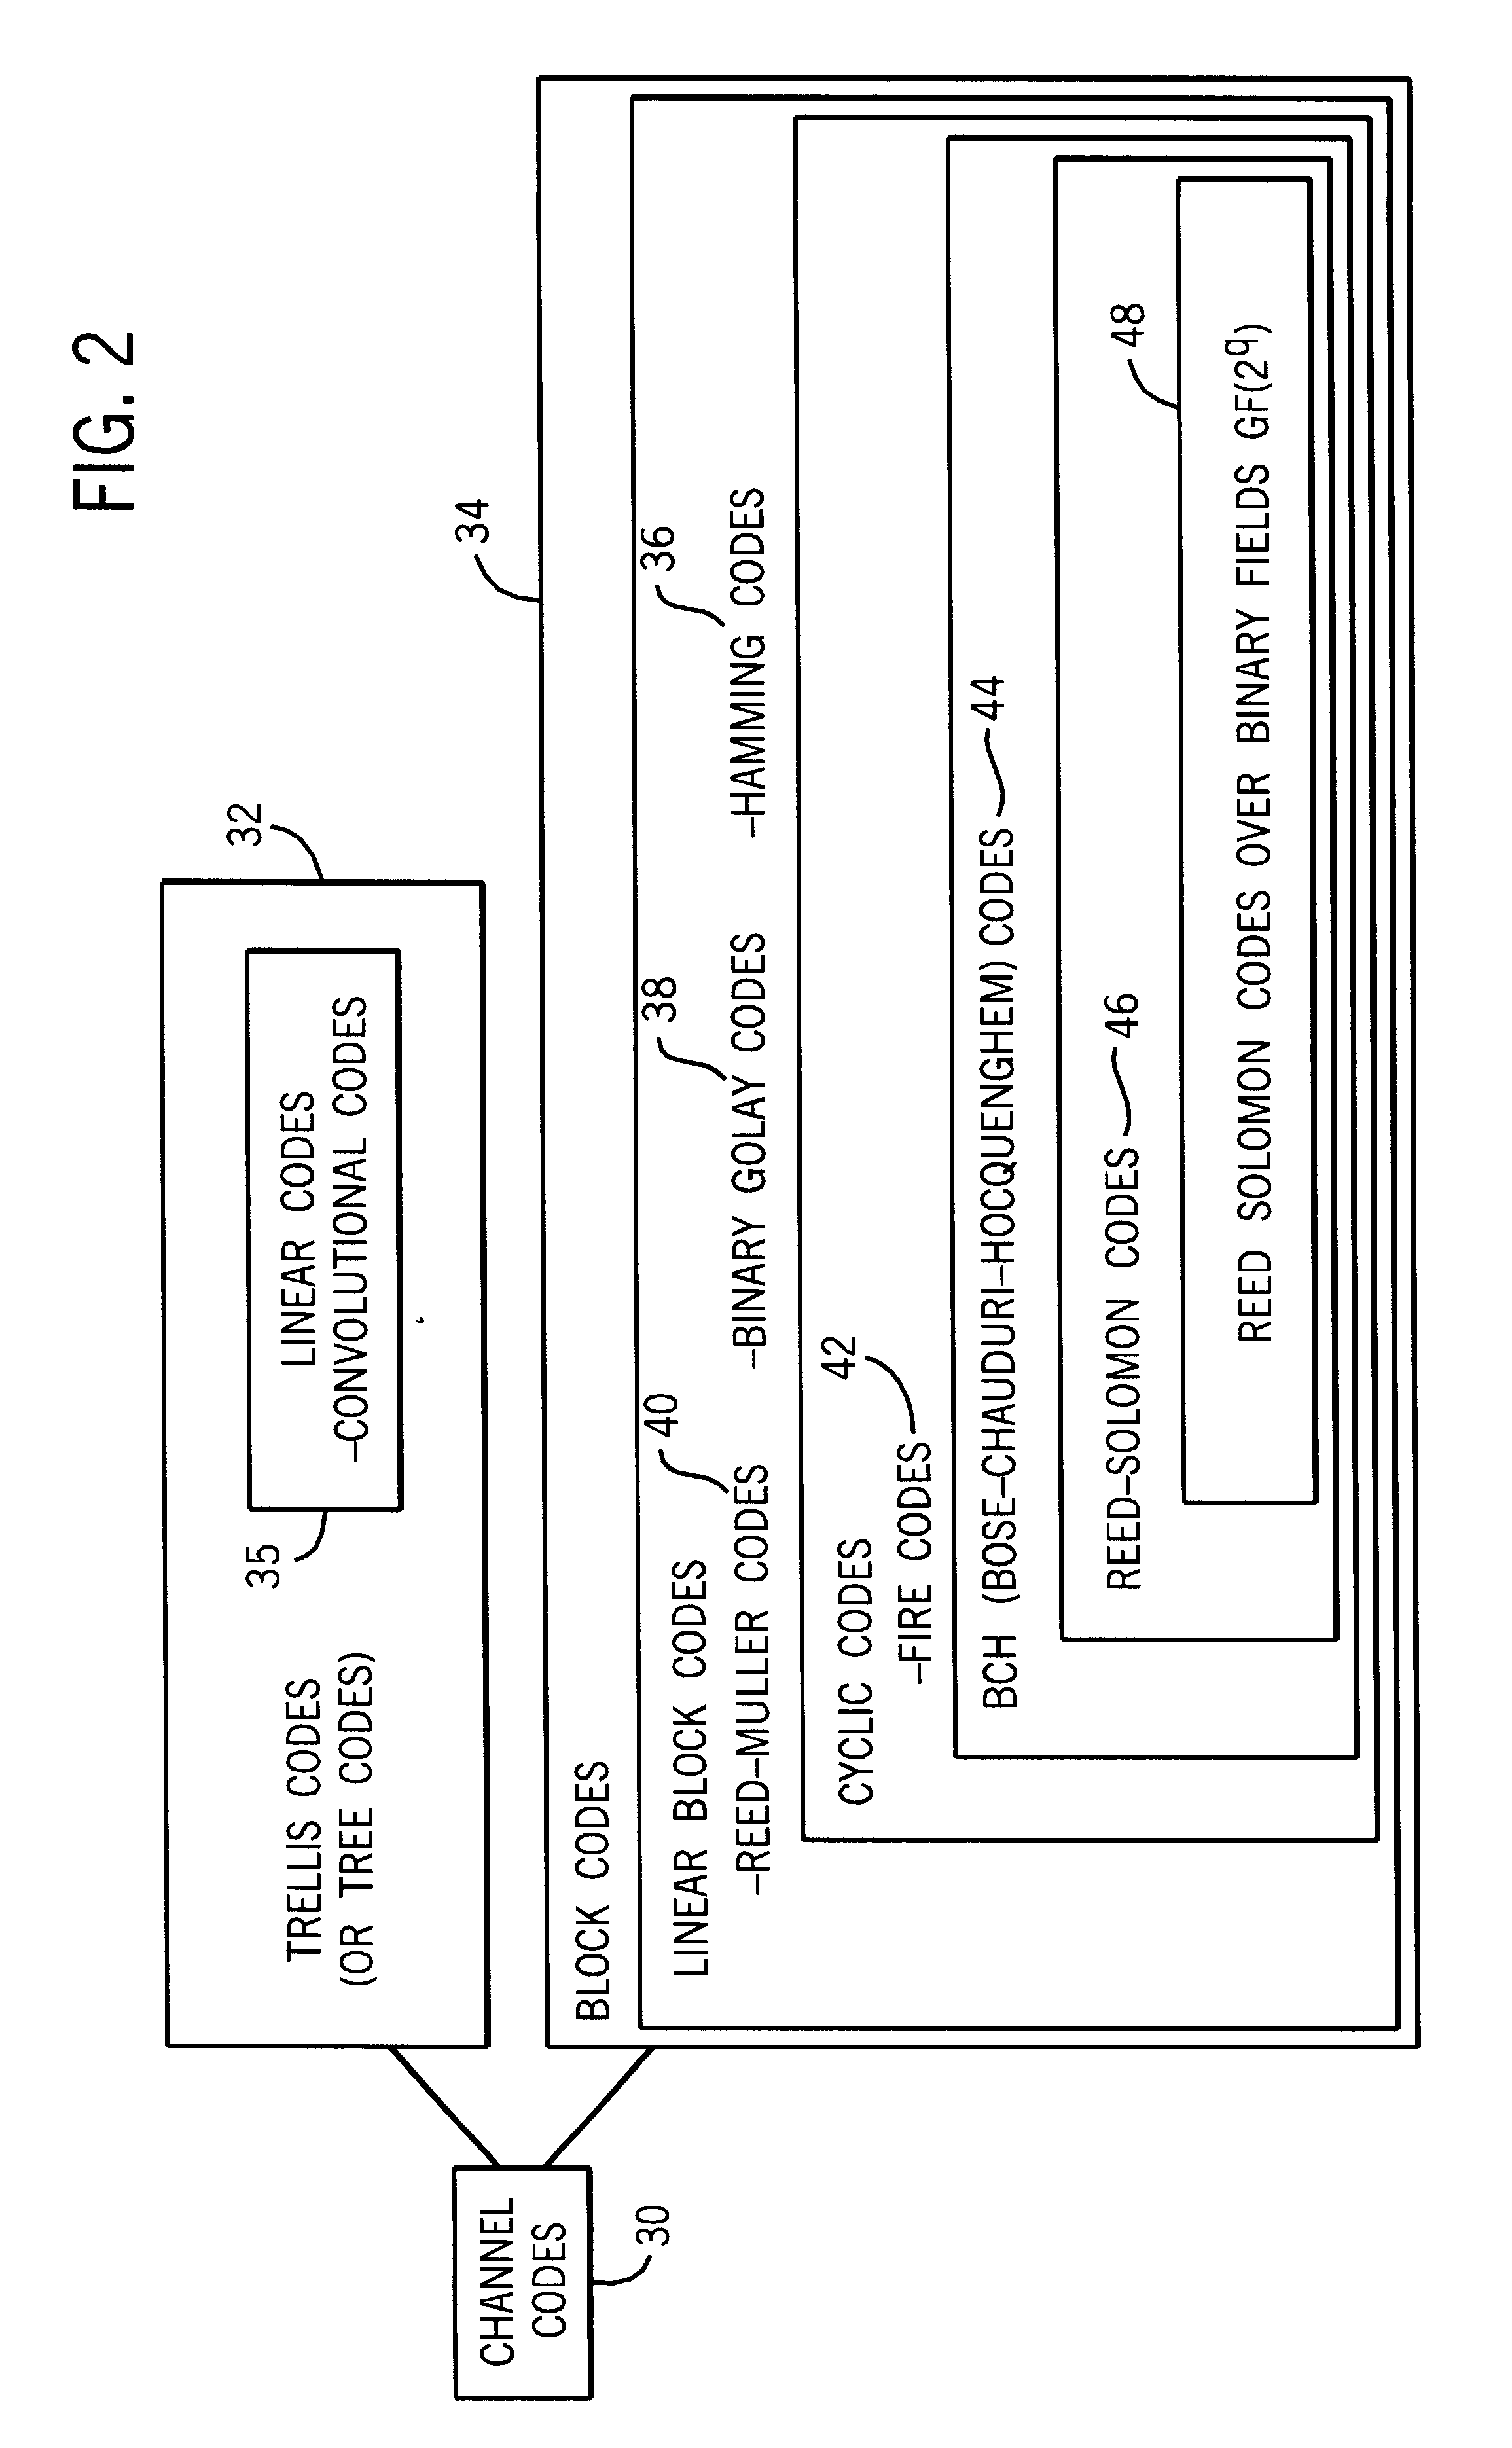 Electronic identification system with forward error correction system